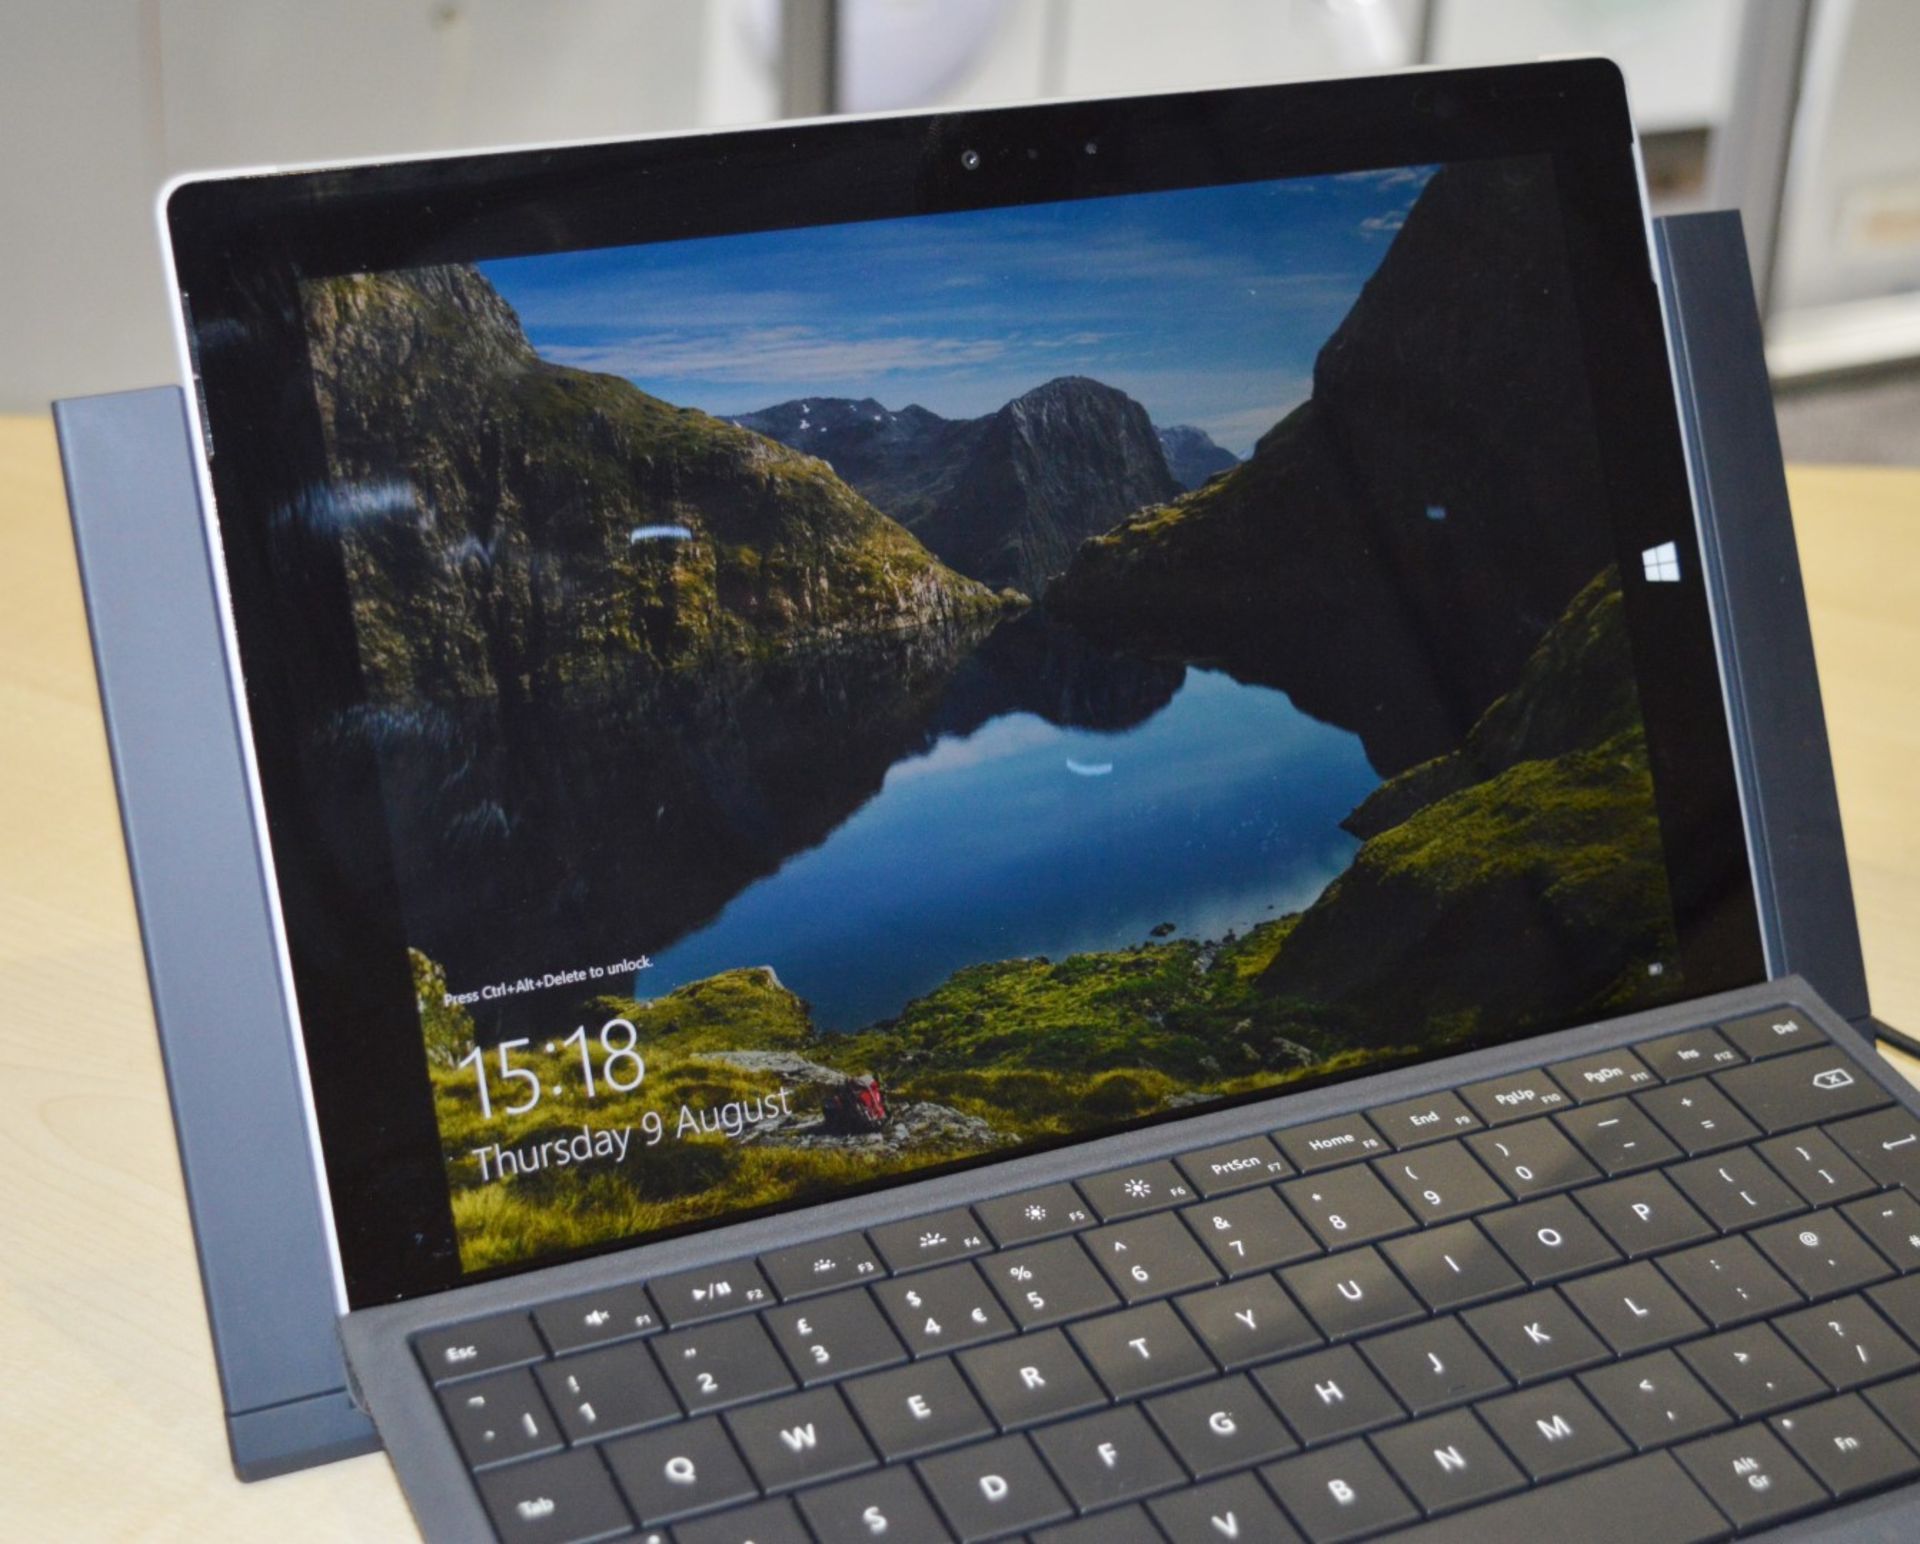 1 x Microsoft Surface 3 Wifi + LTE in Silver With Keyboard Cover and Charging Dock - Intel Atom x7- - Image 3 of 9